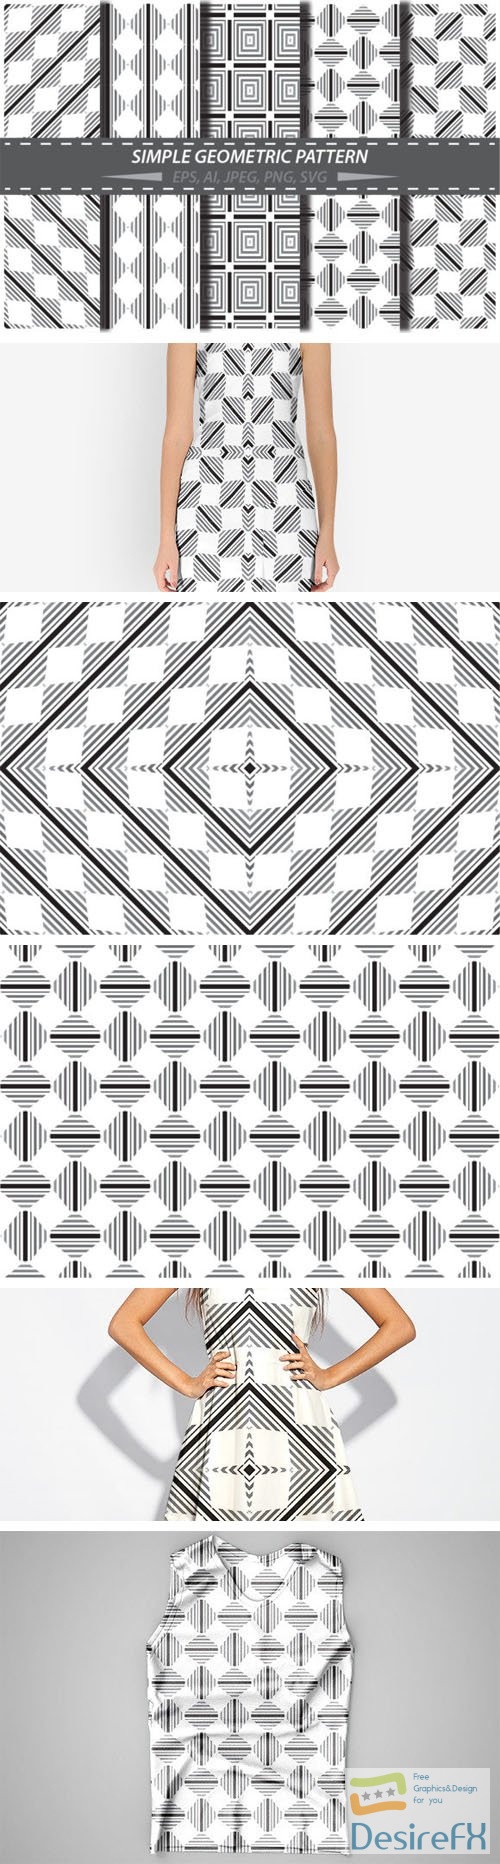 Geometric Patterns - Vector Shapes and Backgrounds